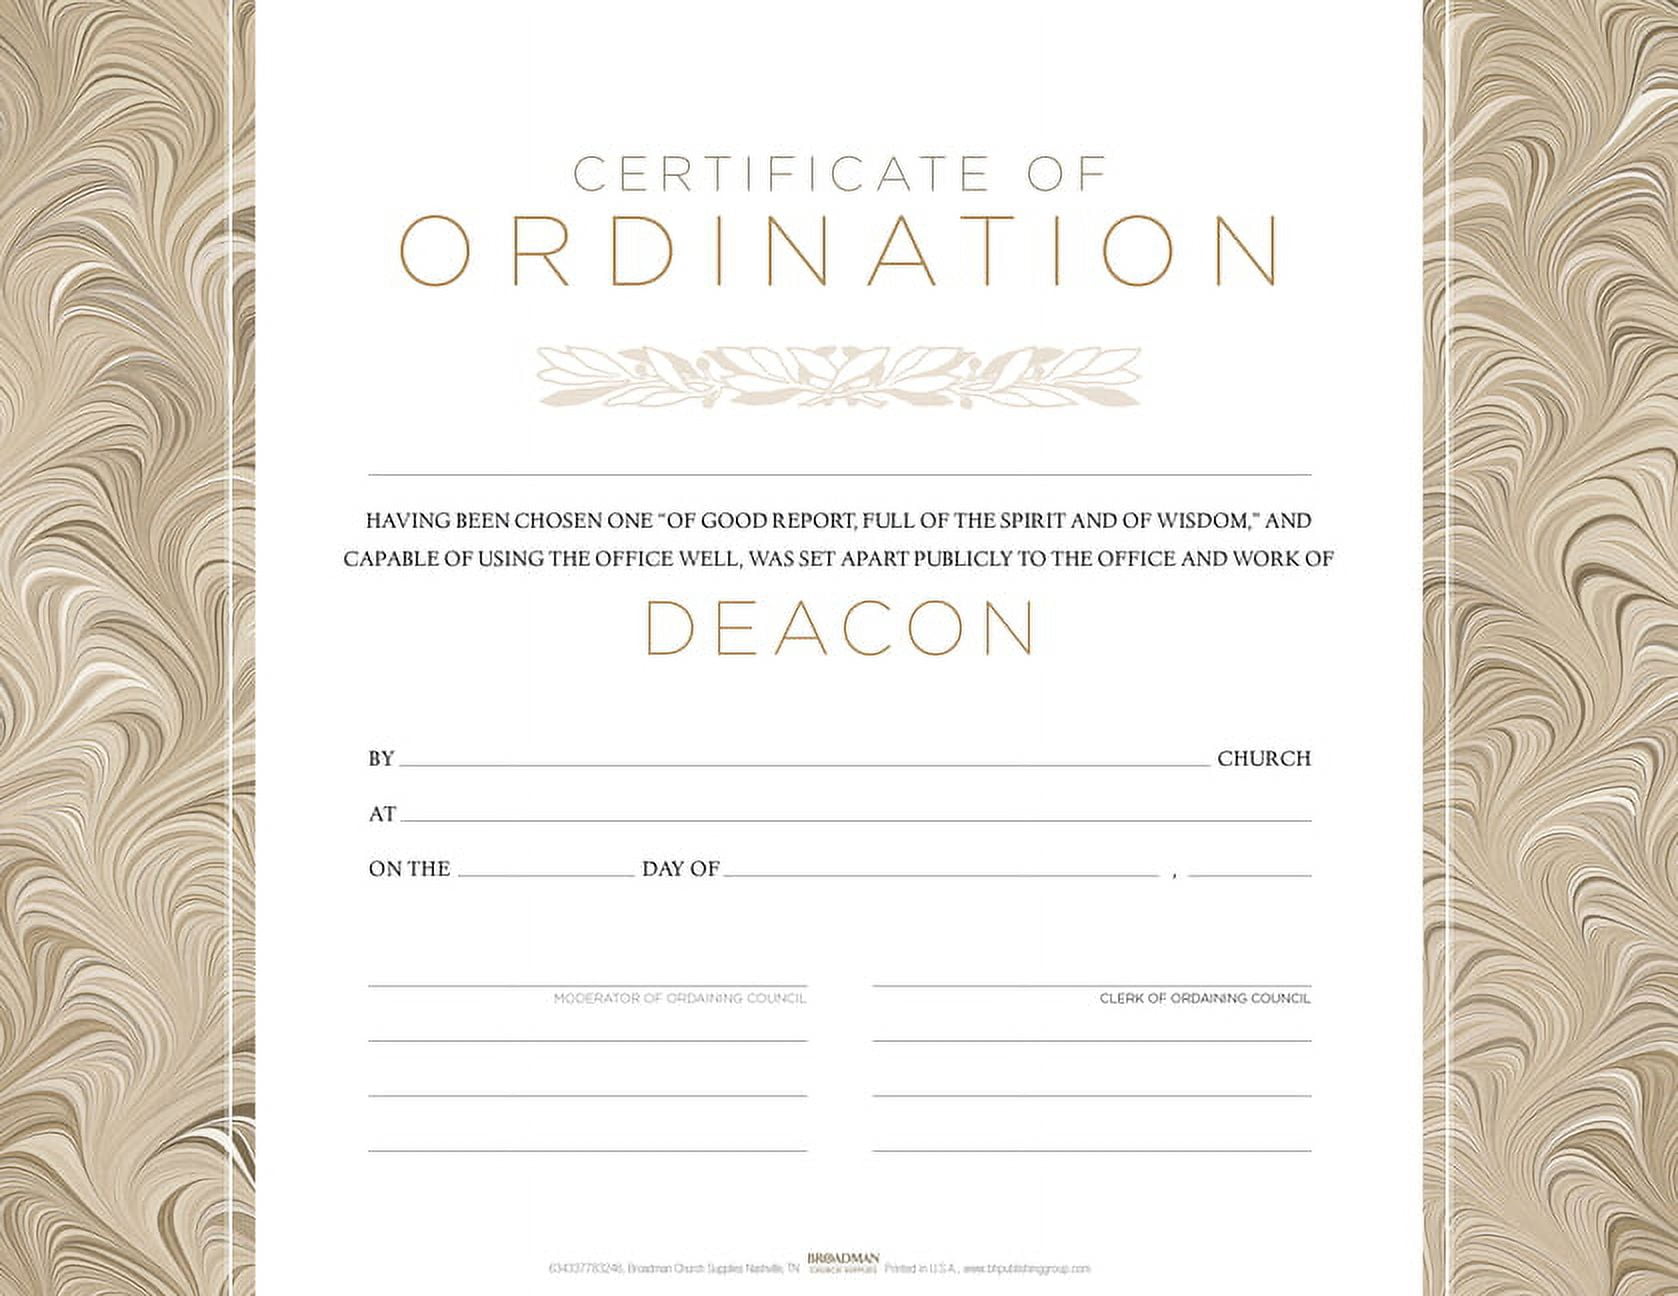 Picture of B & H Publishing 152904 5.5 x 3.5 in. Certificate Ordination Deacon - Pack of 6